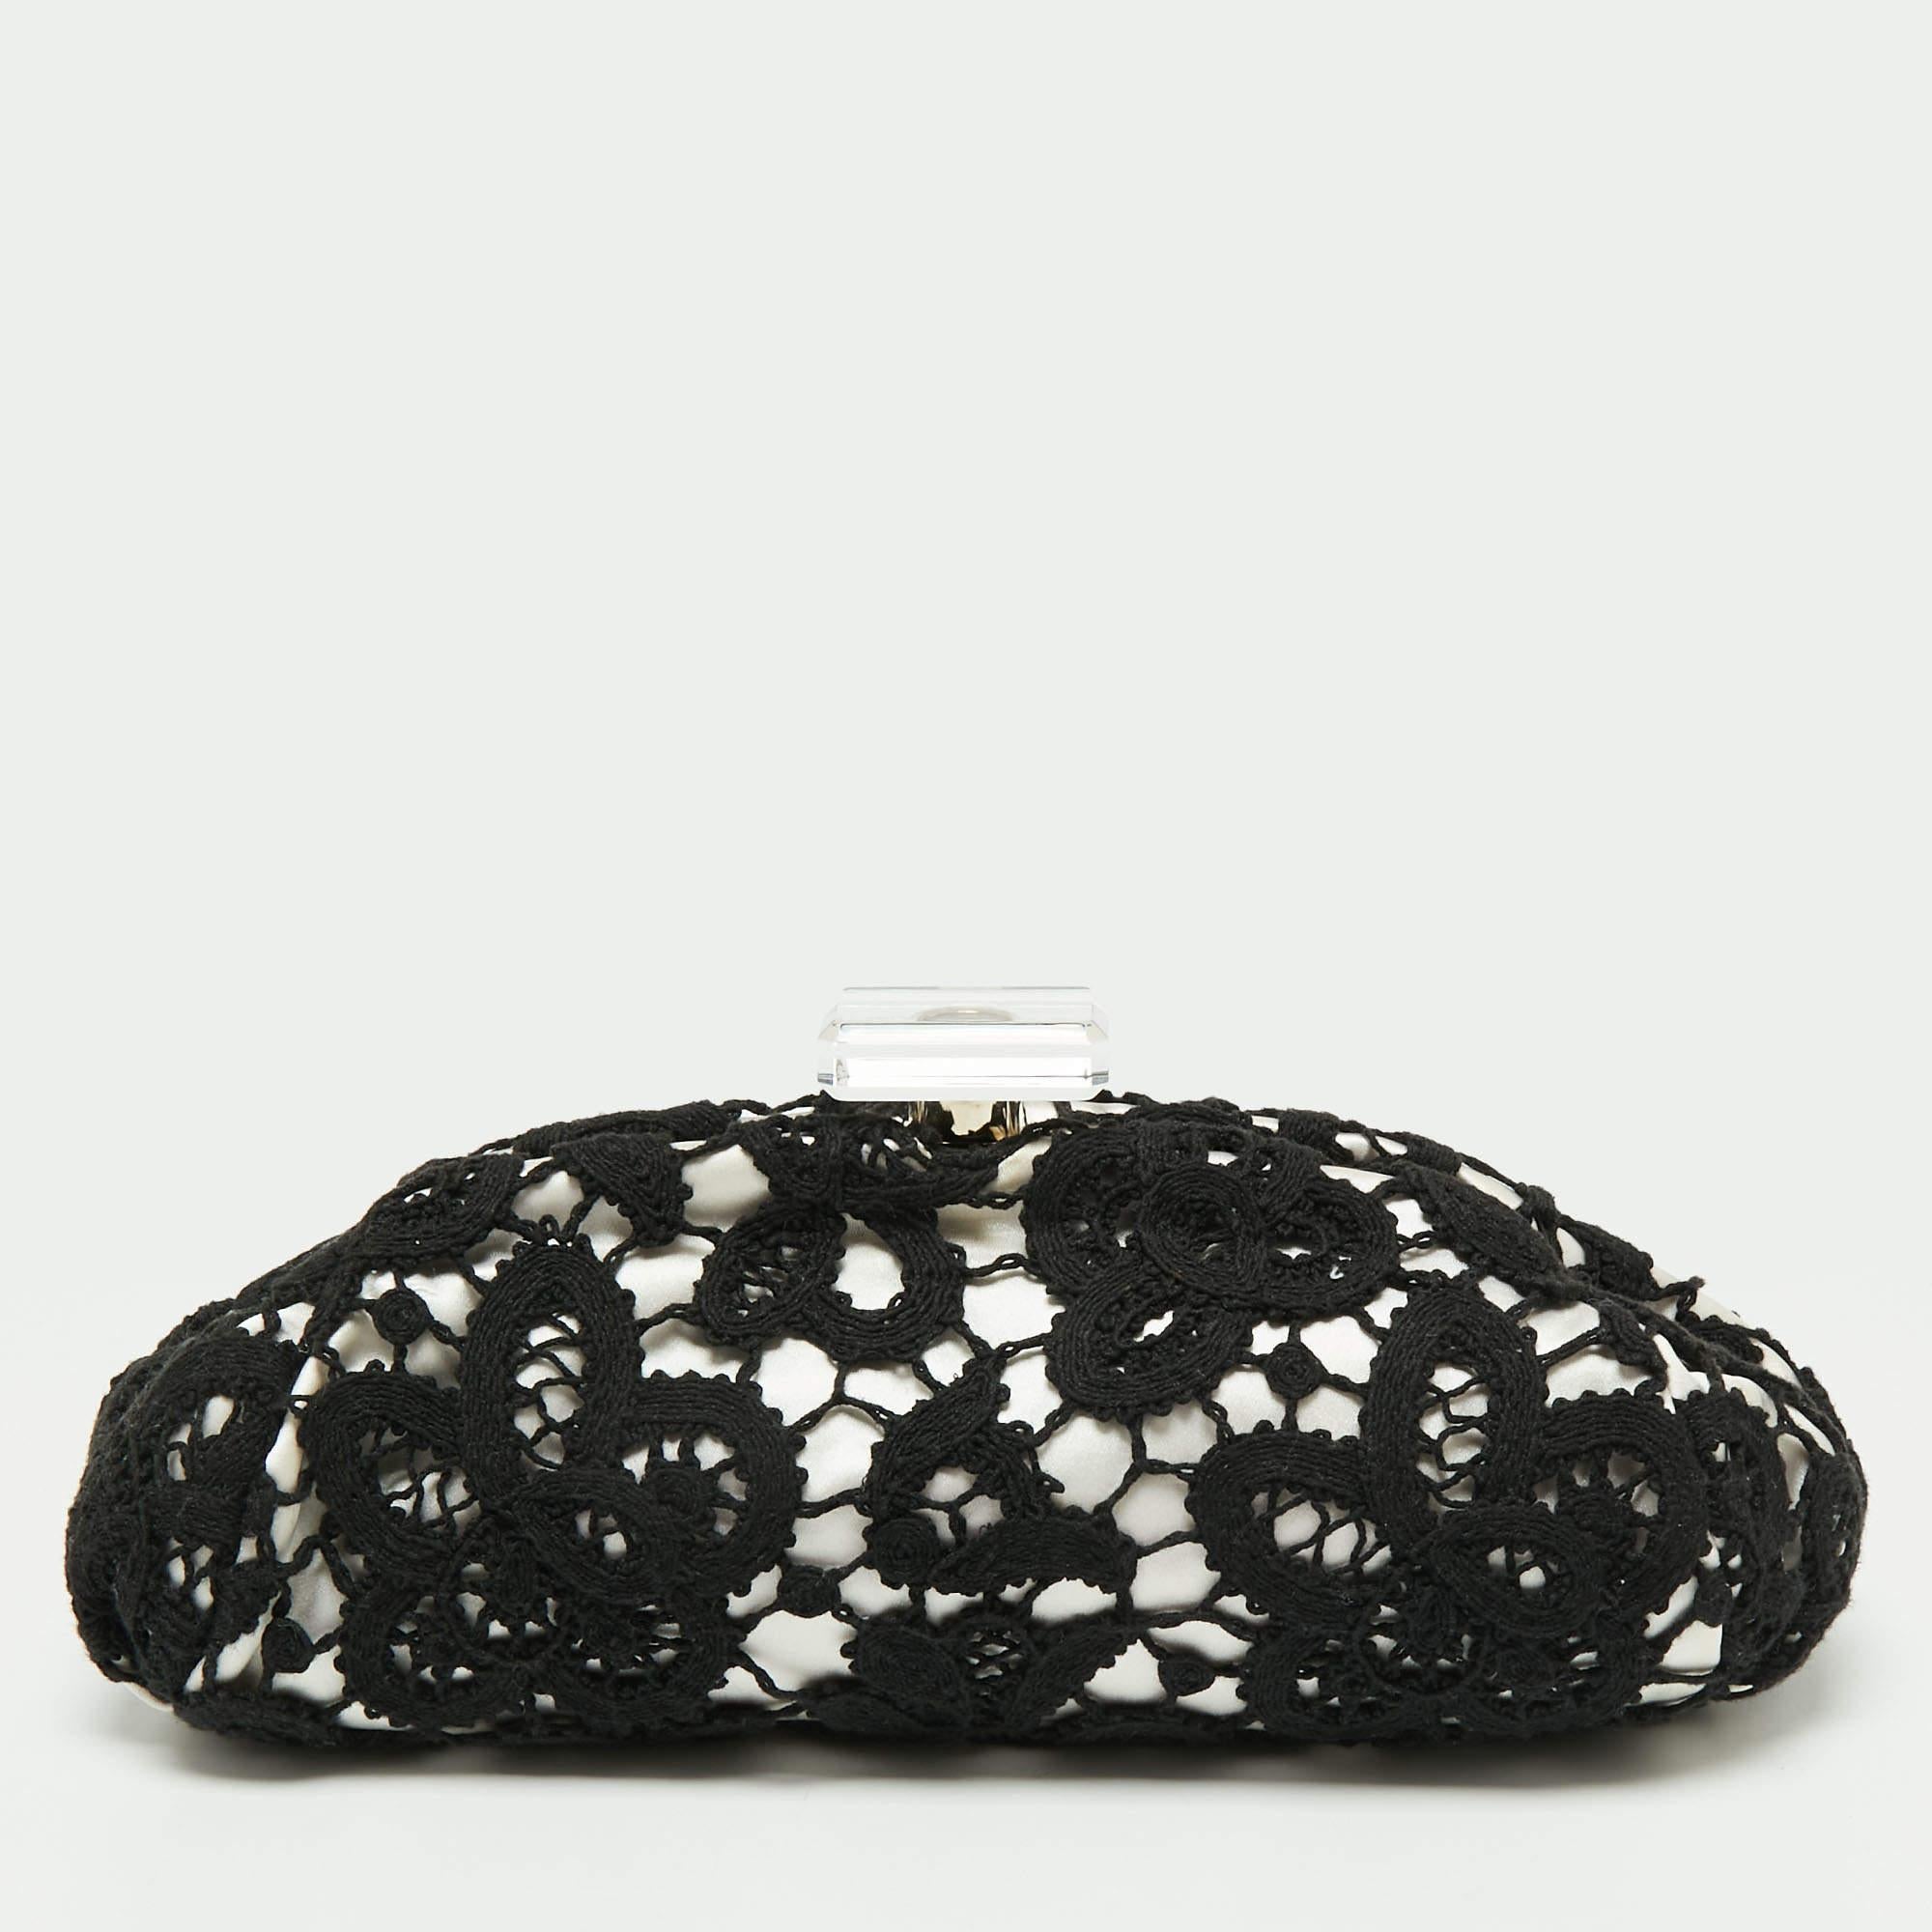 Chanel presents to you this lovely frame clutch for parties and special events! It is crafted from beautiful lace and flaunts a sleek shape with a frame-top. It is complete with a well-sized satin interior.

